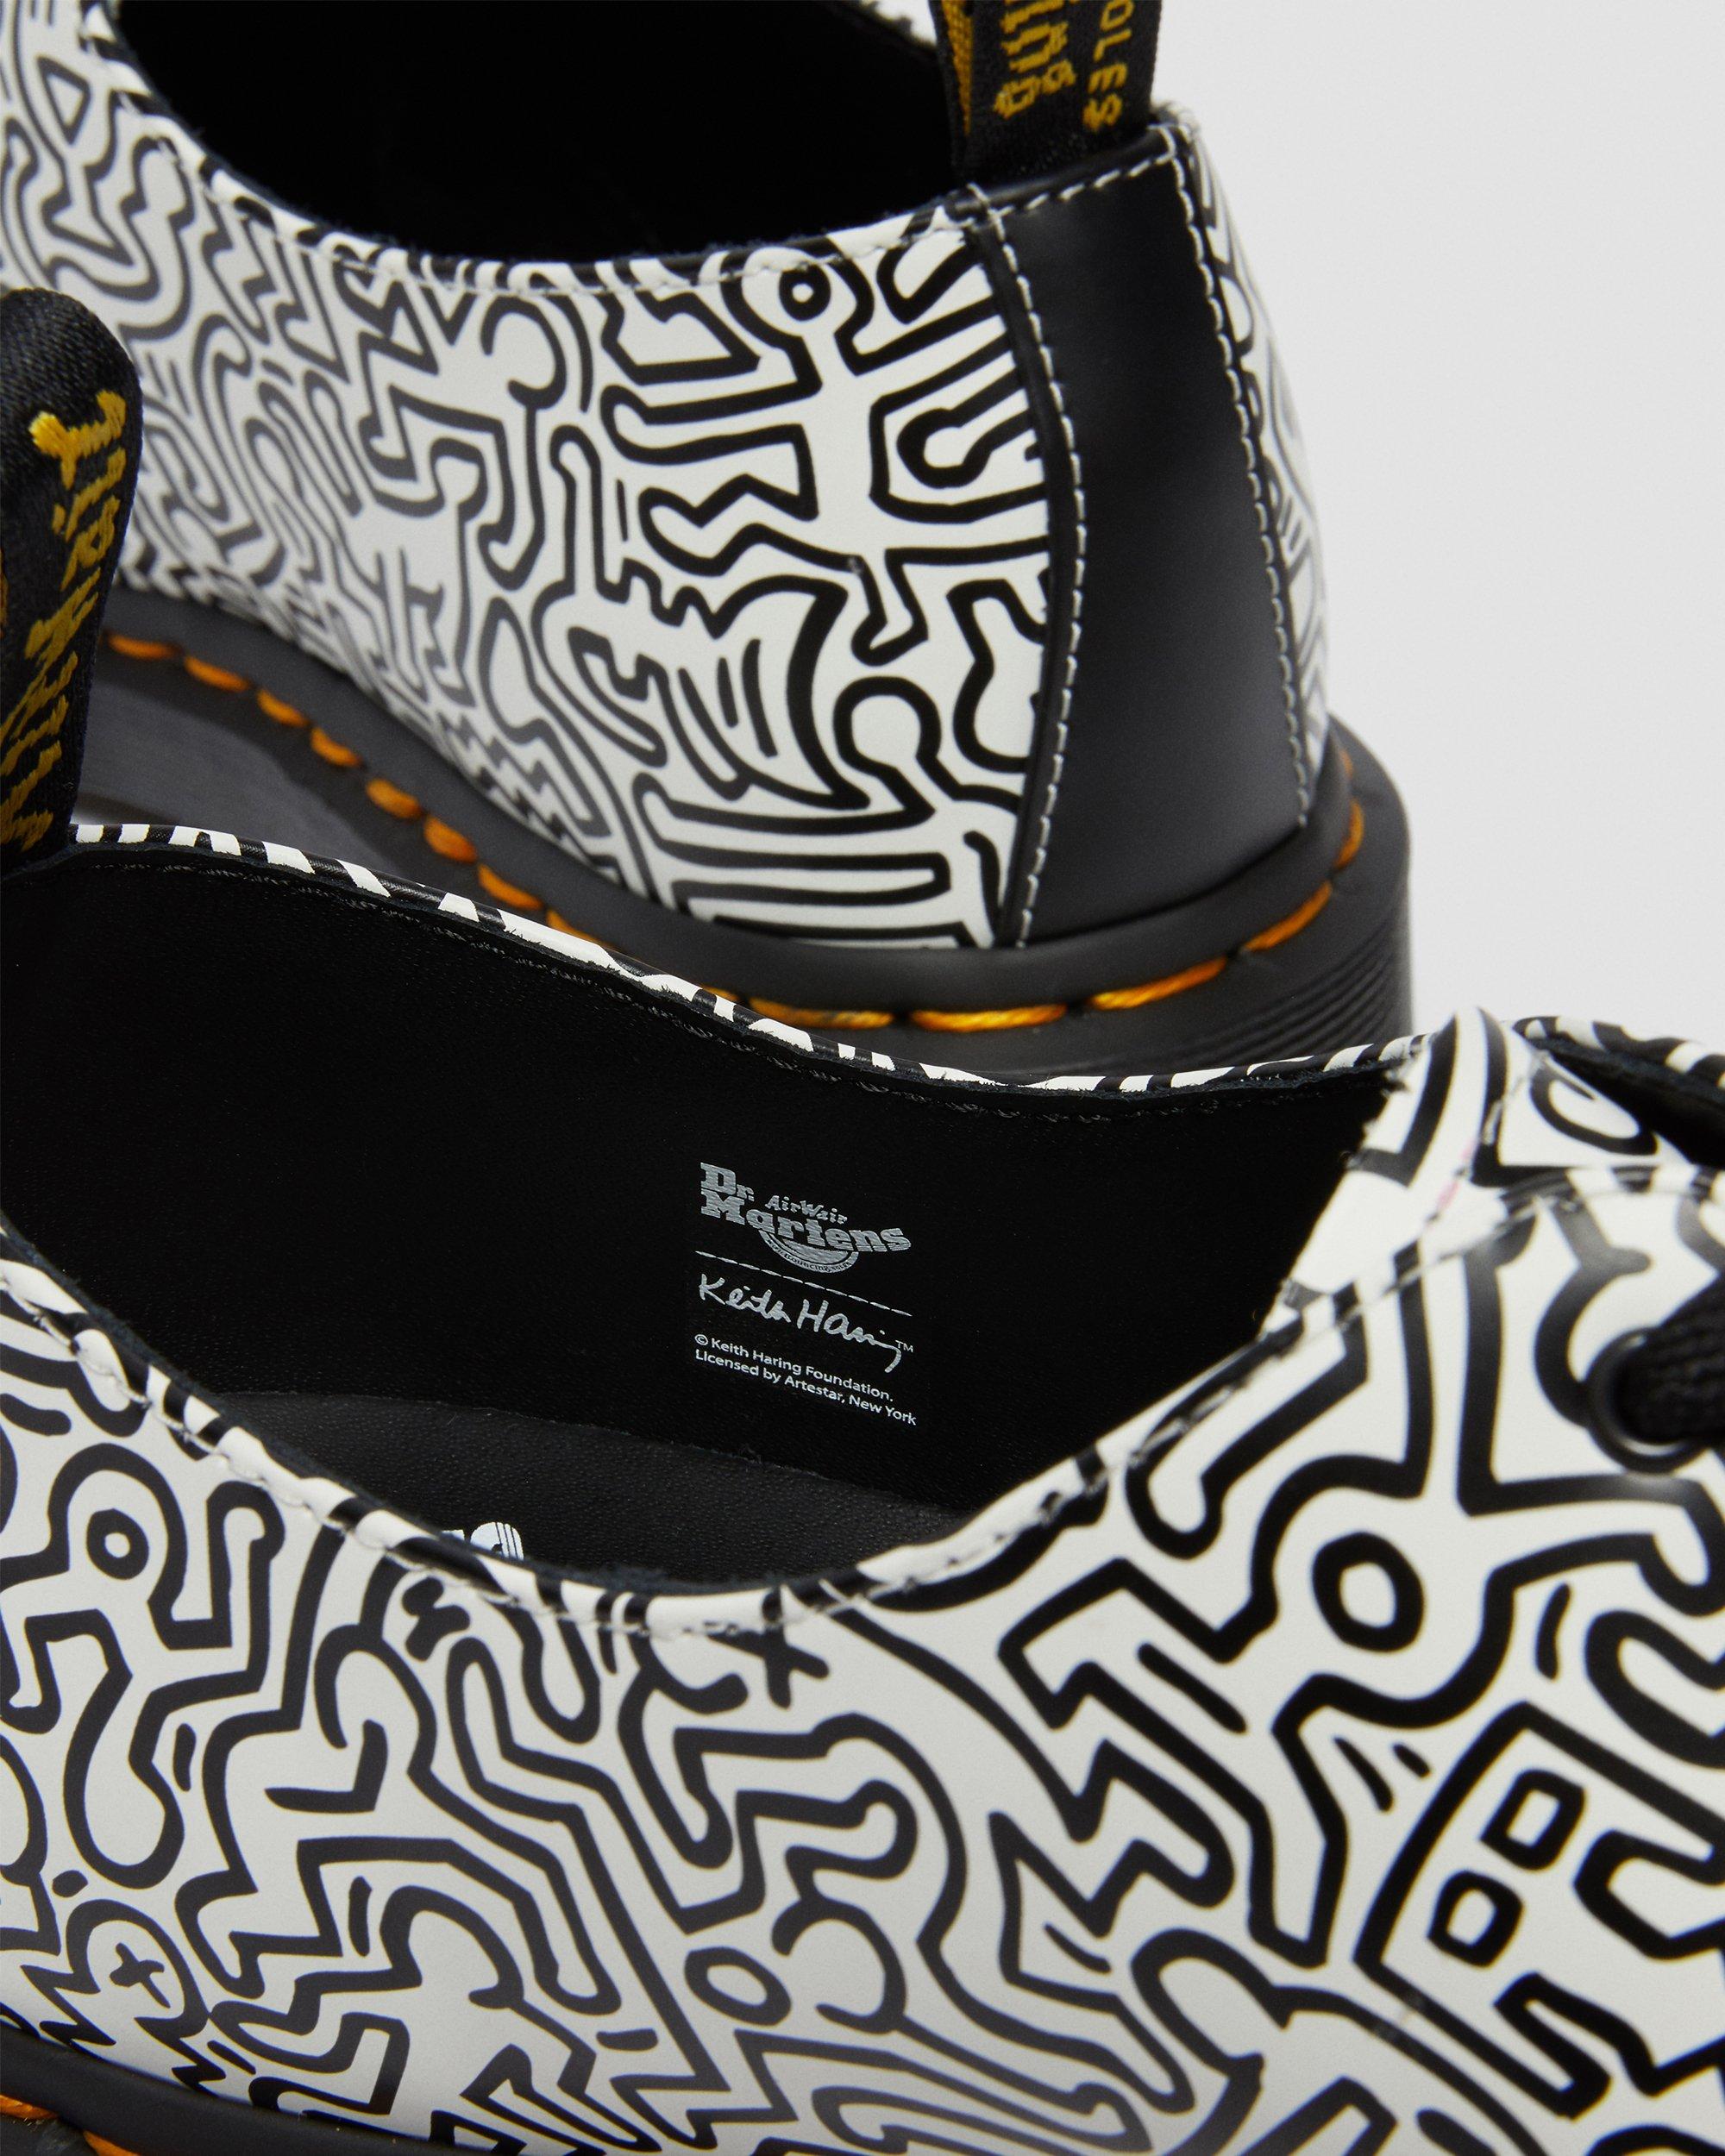 1461 Keith Haring Black & White Printed Leather Shoes in Black+White